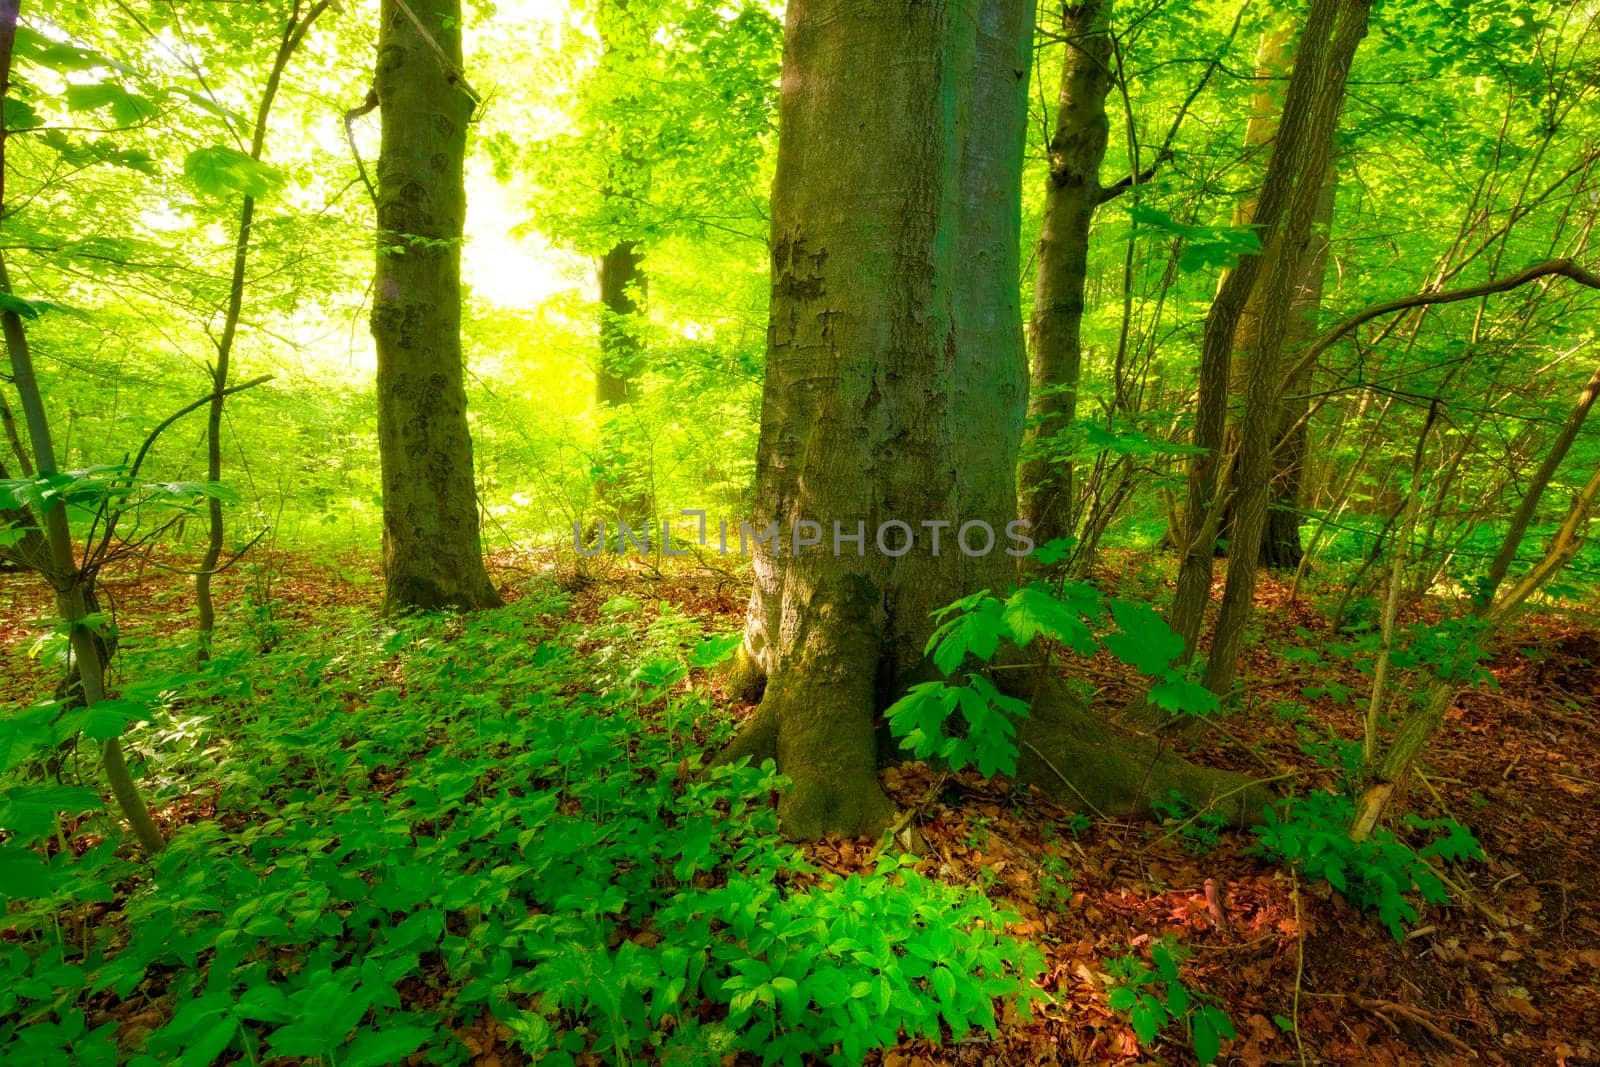 Environment, flare and forest with trees in summer for conservation or sustainability of ecosystem. Earth, growth and landscape with green rainforest or woods for adventure, exploration and hiking.